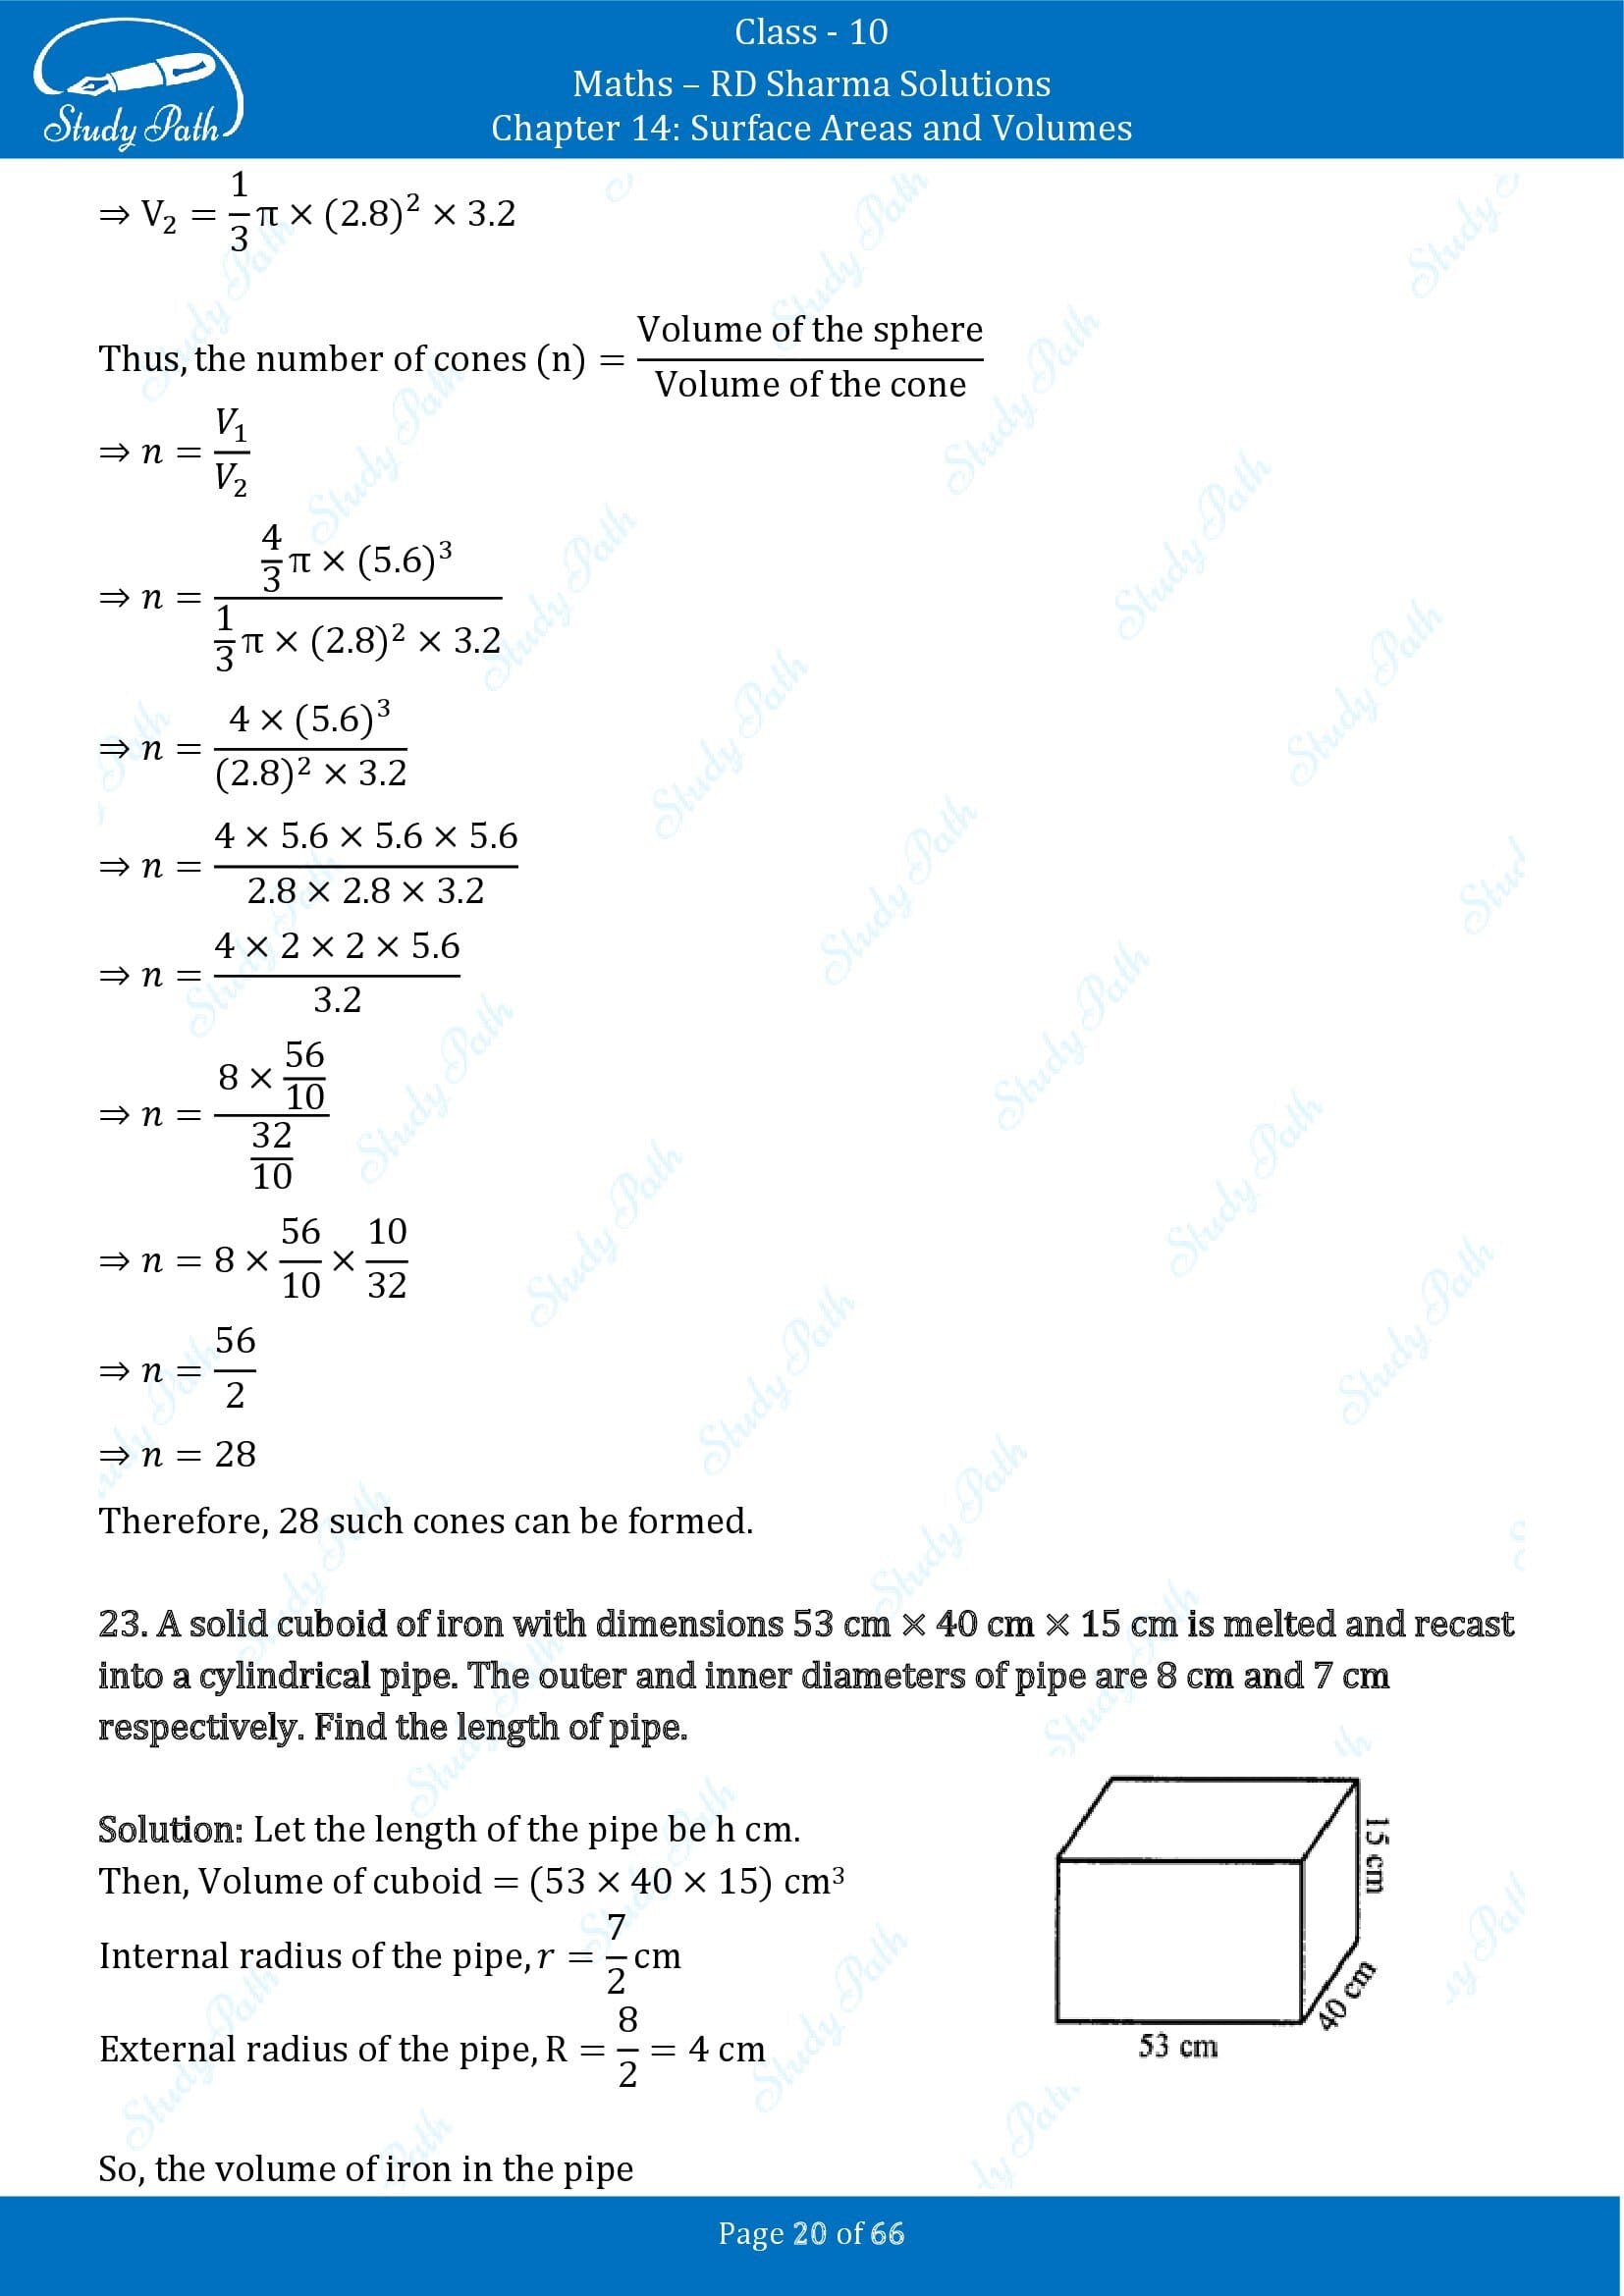 RD Sharma Solutions Class 10 Chapter 14 Surface Areas and Volumes Exercise 14.1 00020